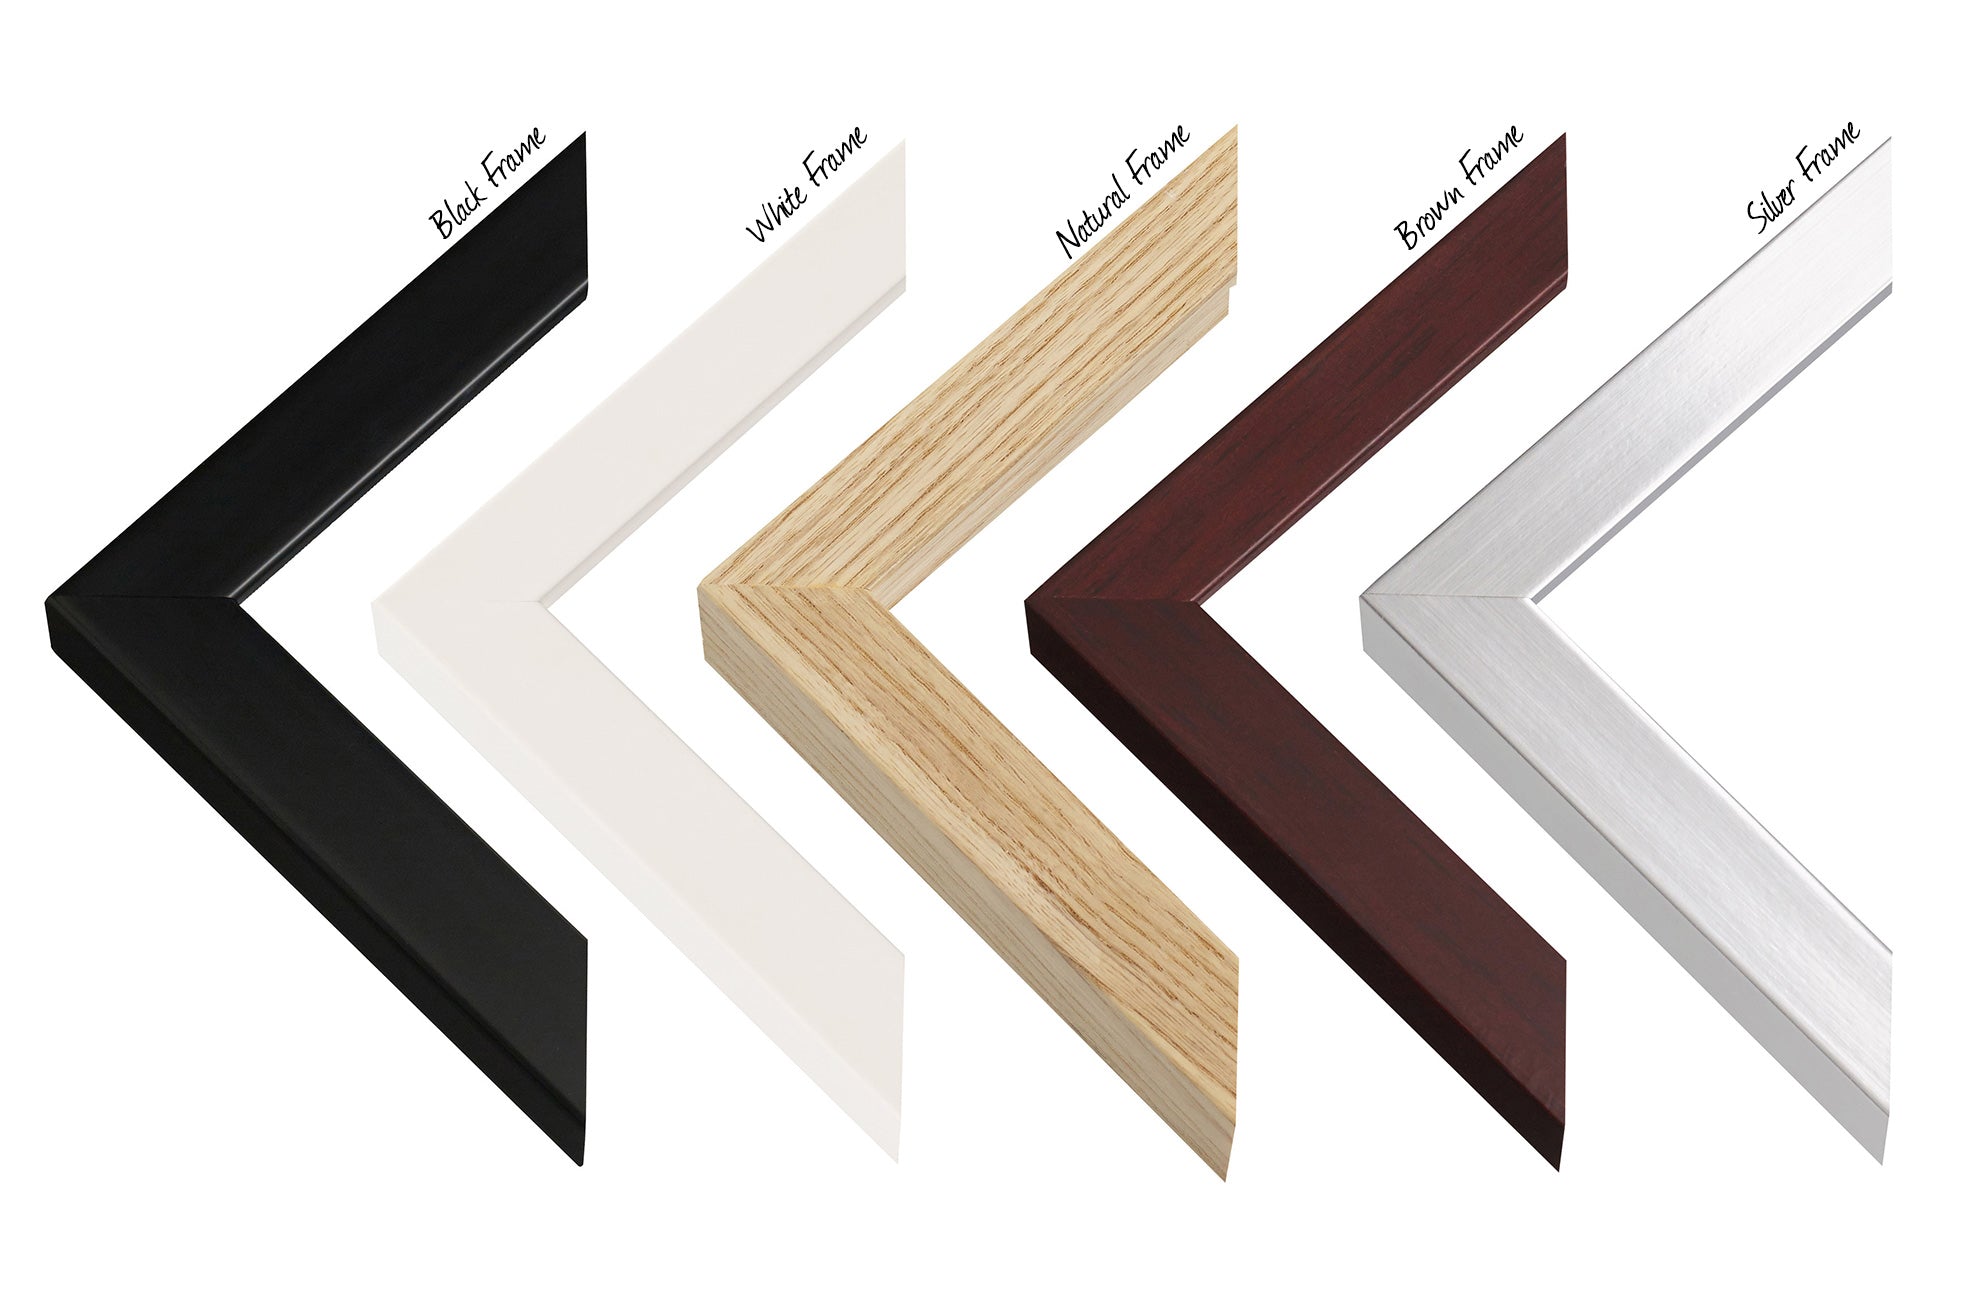 Frame colours - black, white, natural, brown and silver